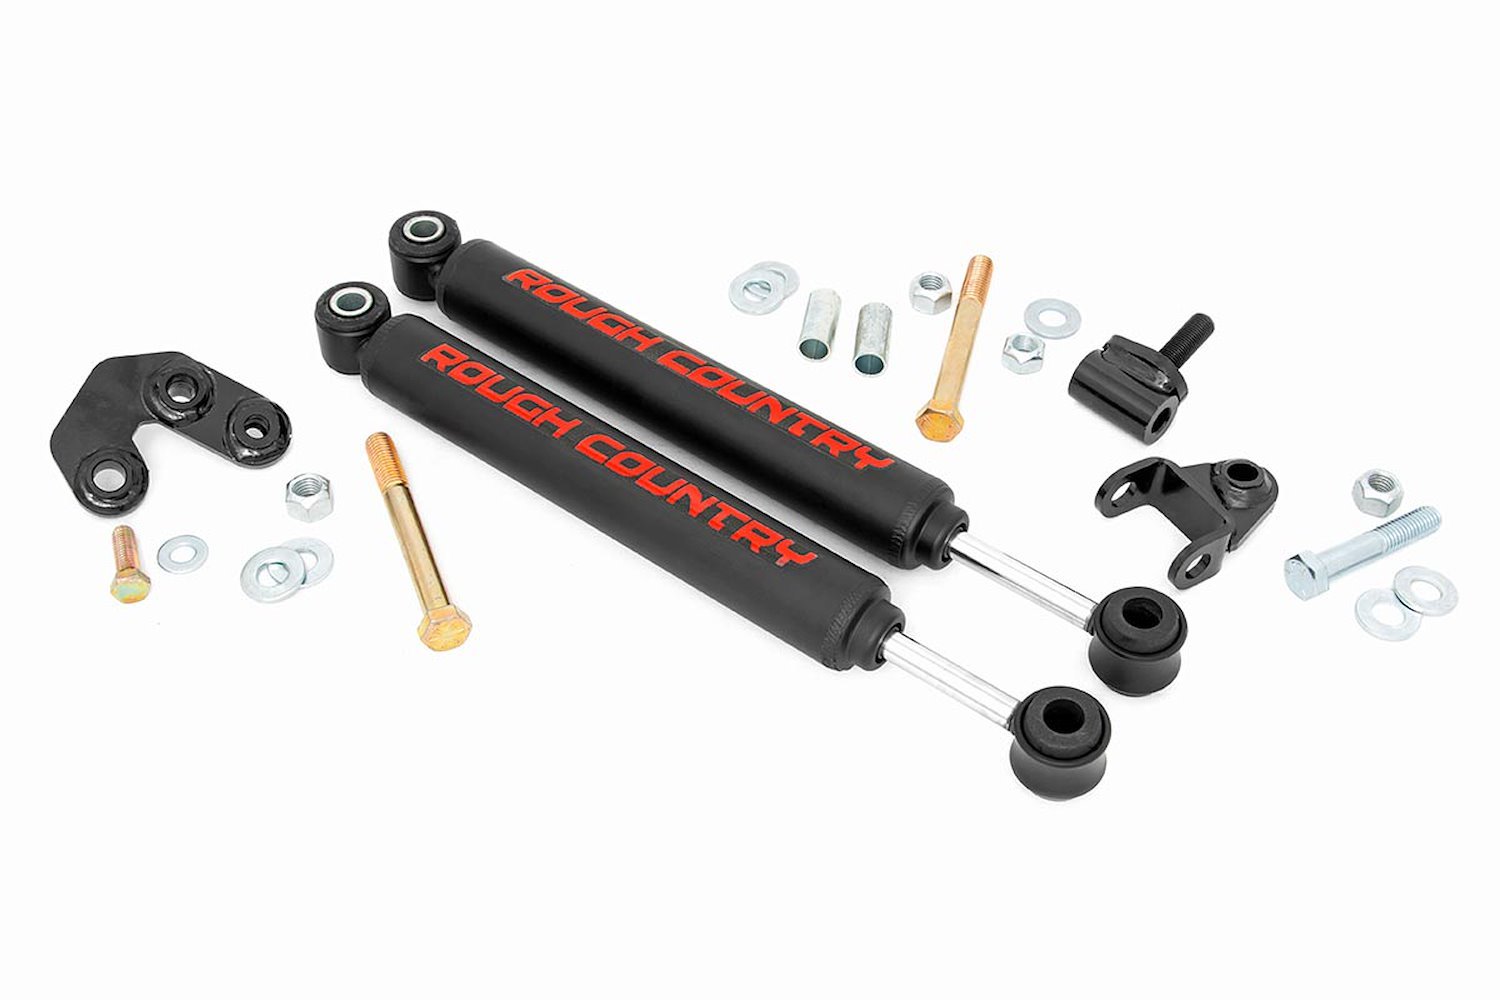 87308 Stacked Dual Steering Stabilizer for 2.5-6.5-inch Lifts